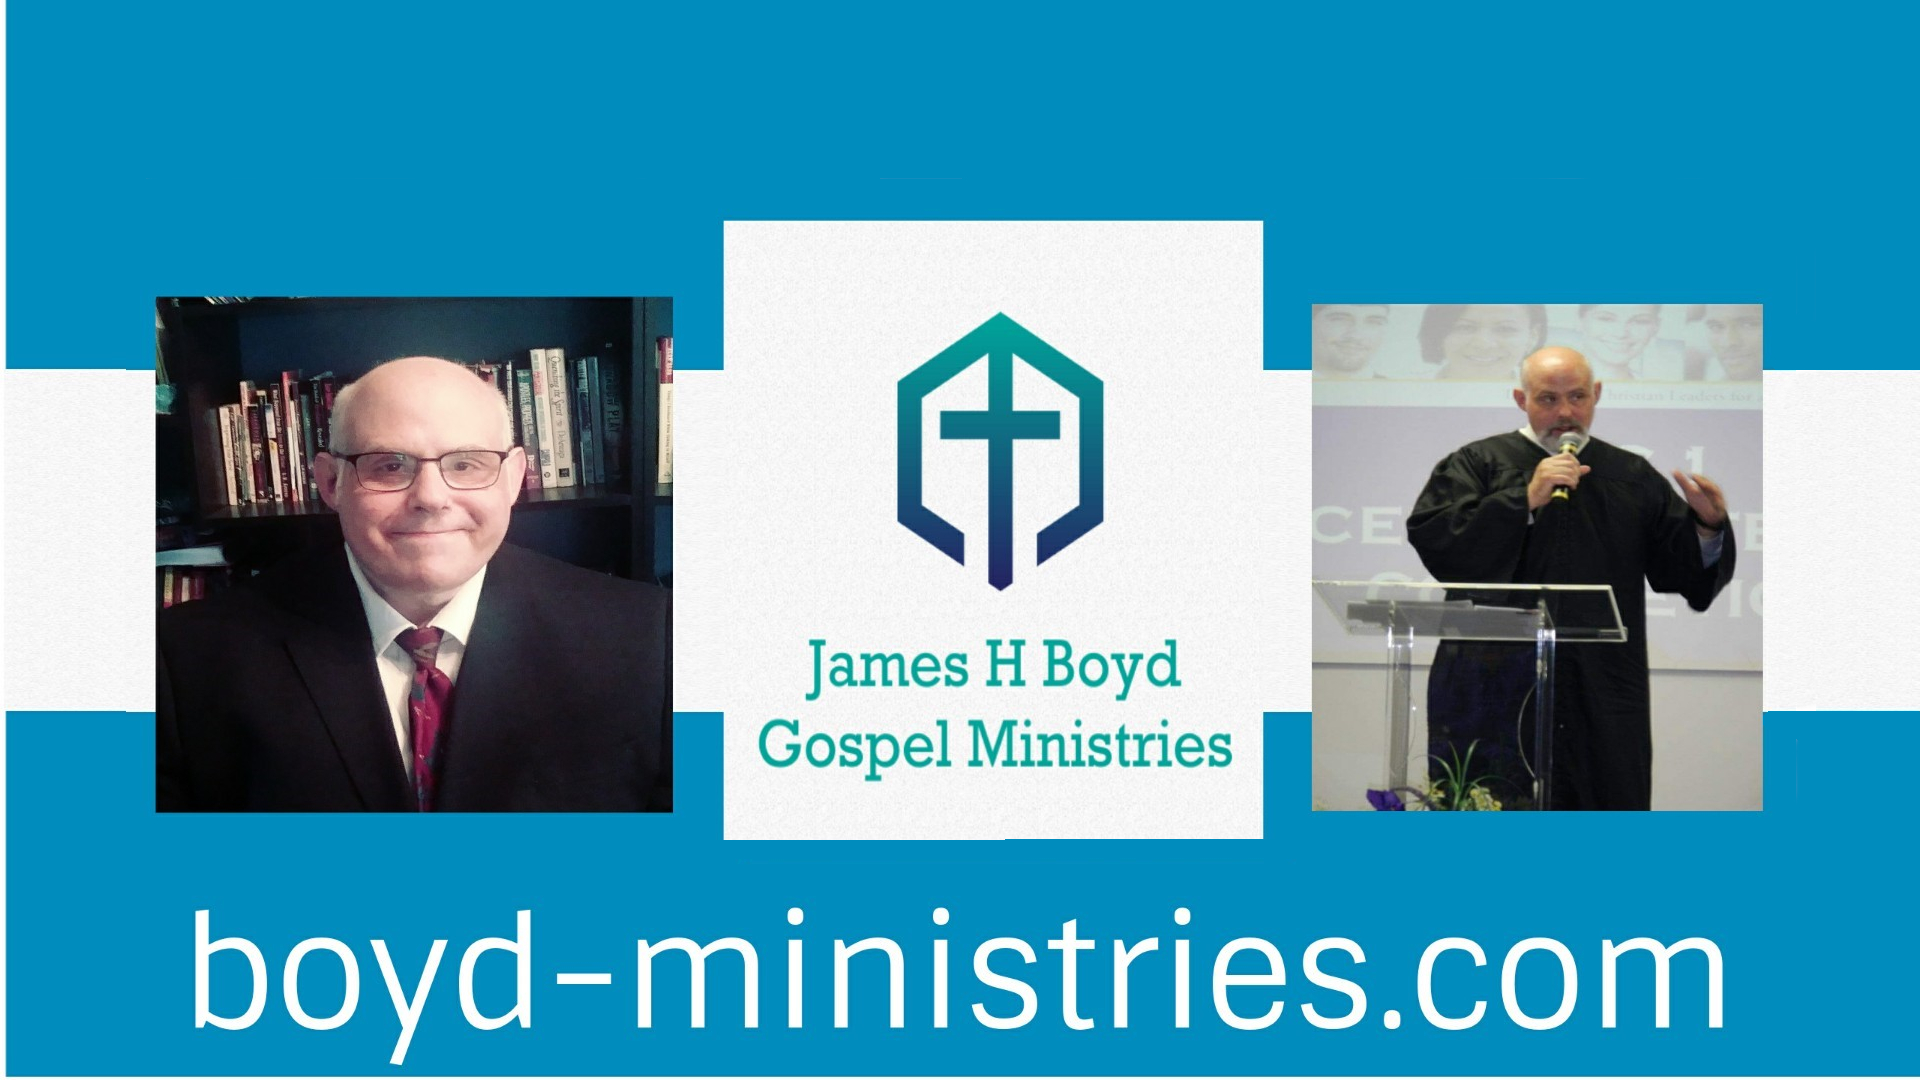 Welcome to the Official Home of James H Boyd Gospel Ministries